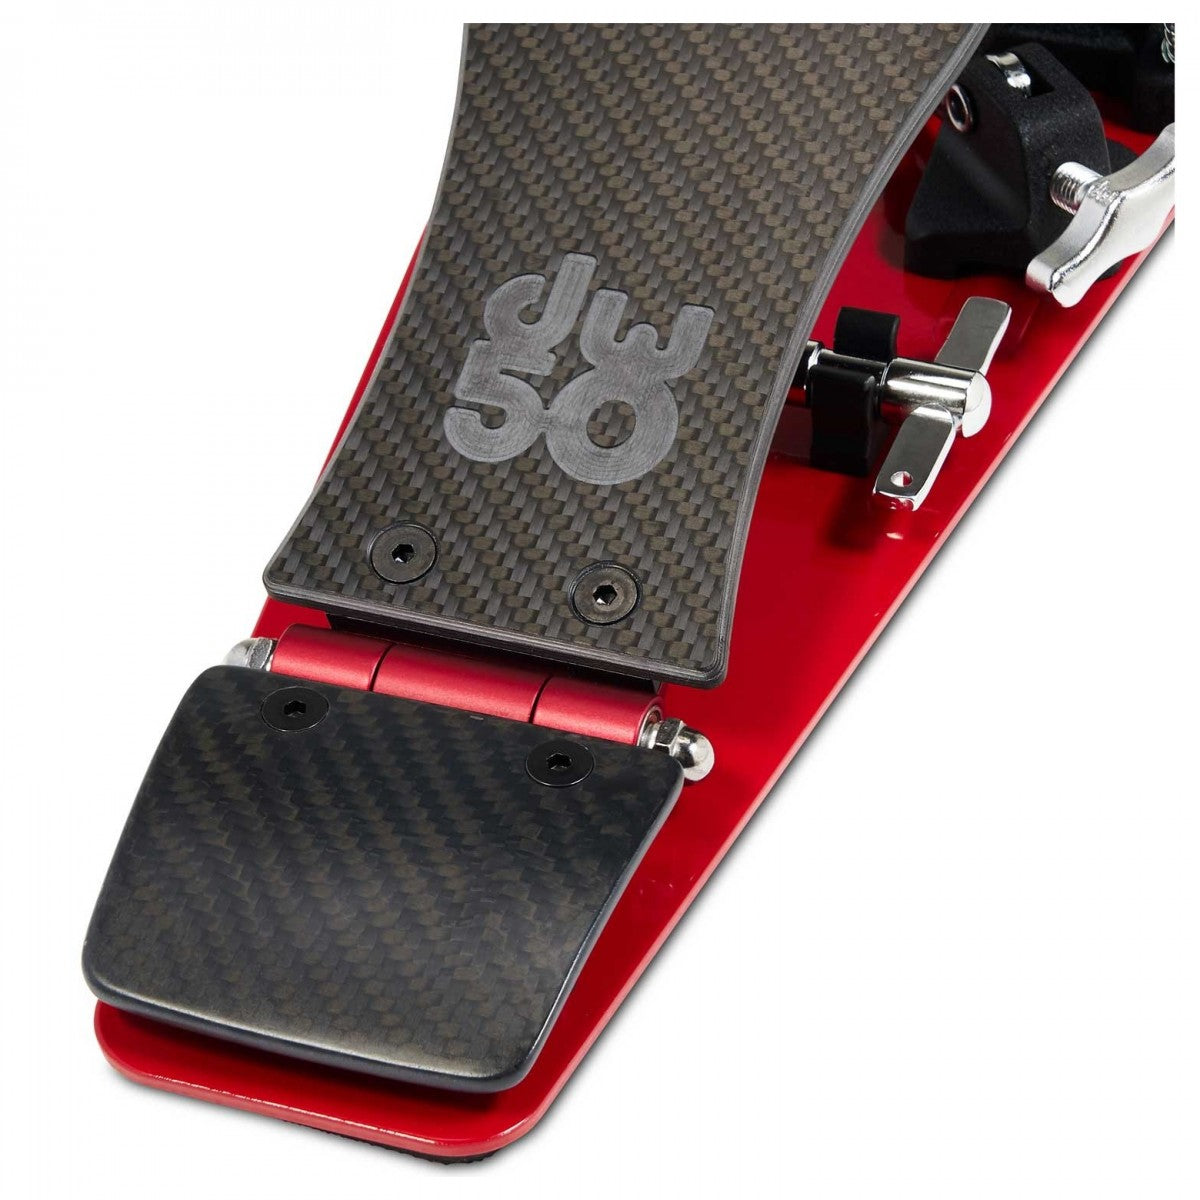 DW 50th Anniversary 5000 Series Double Bass Drum Pedal